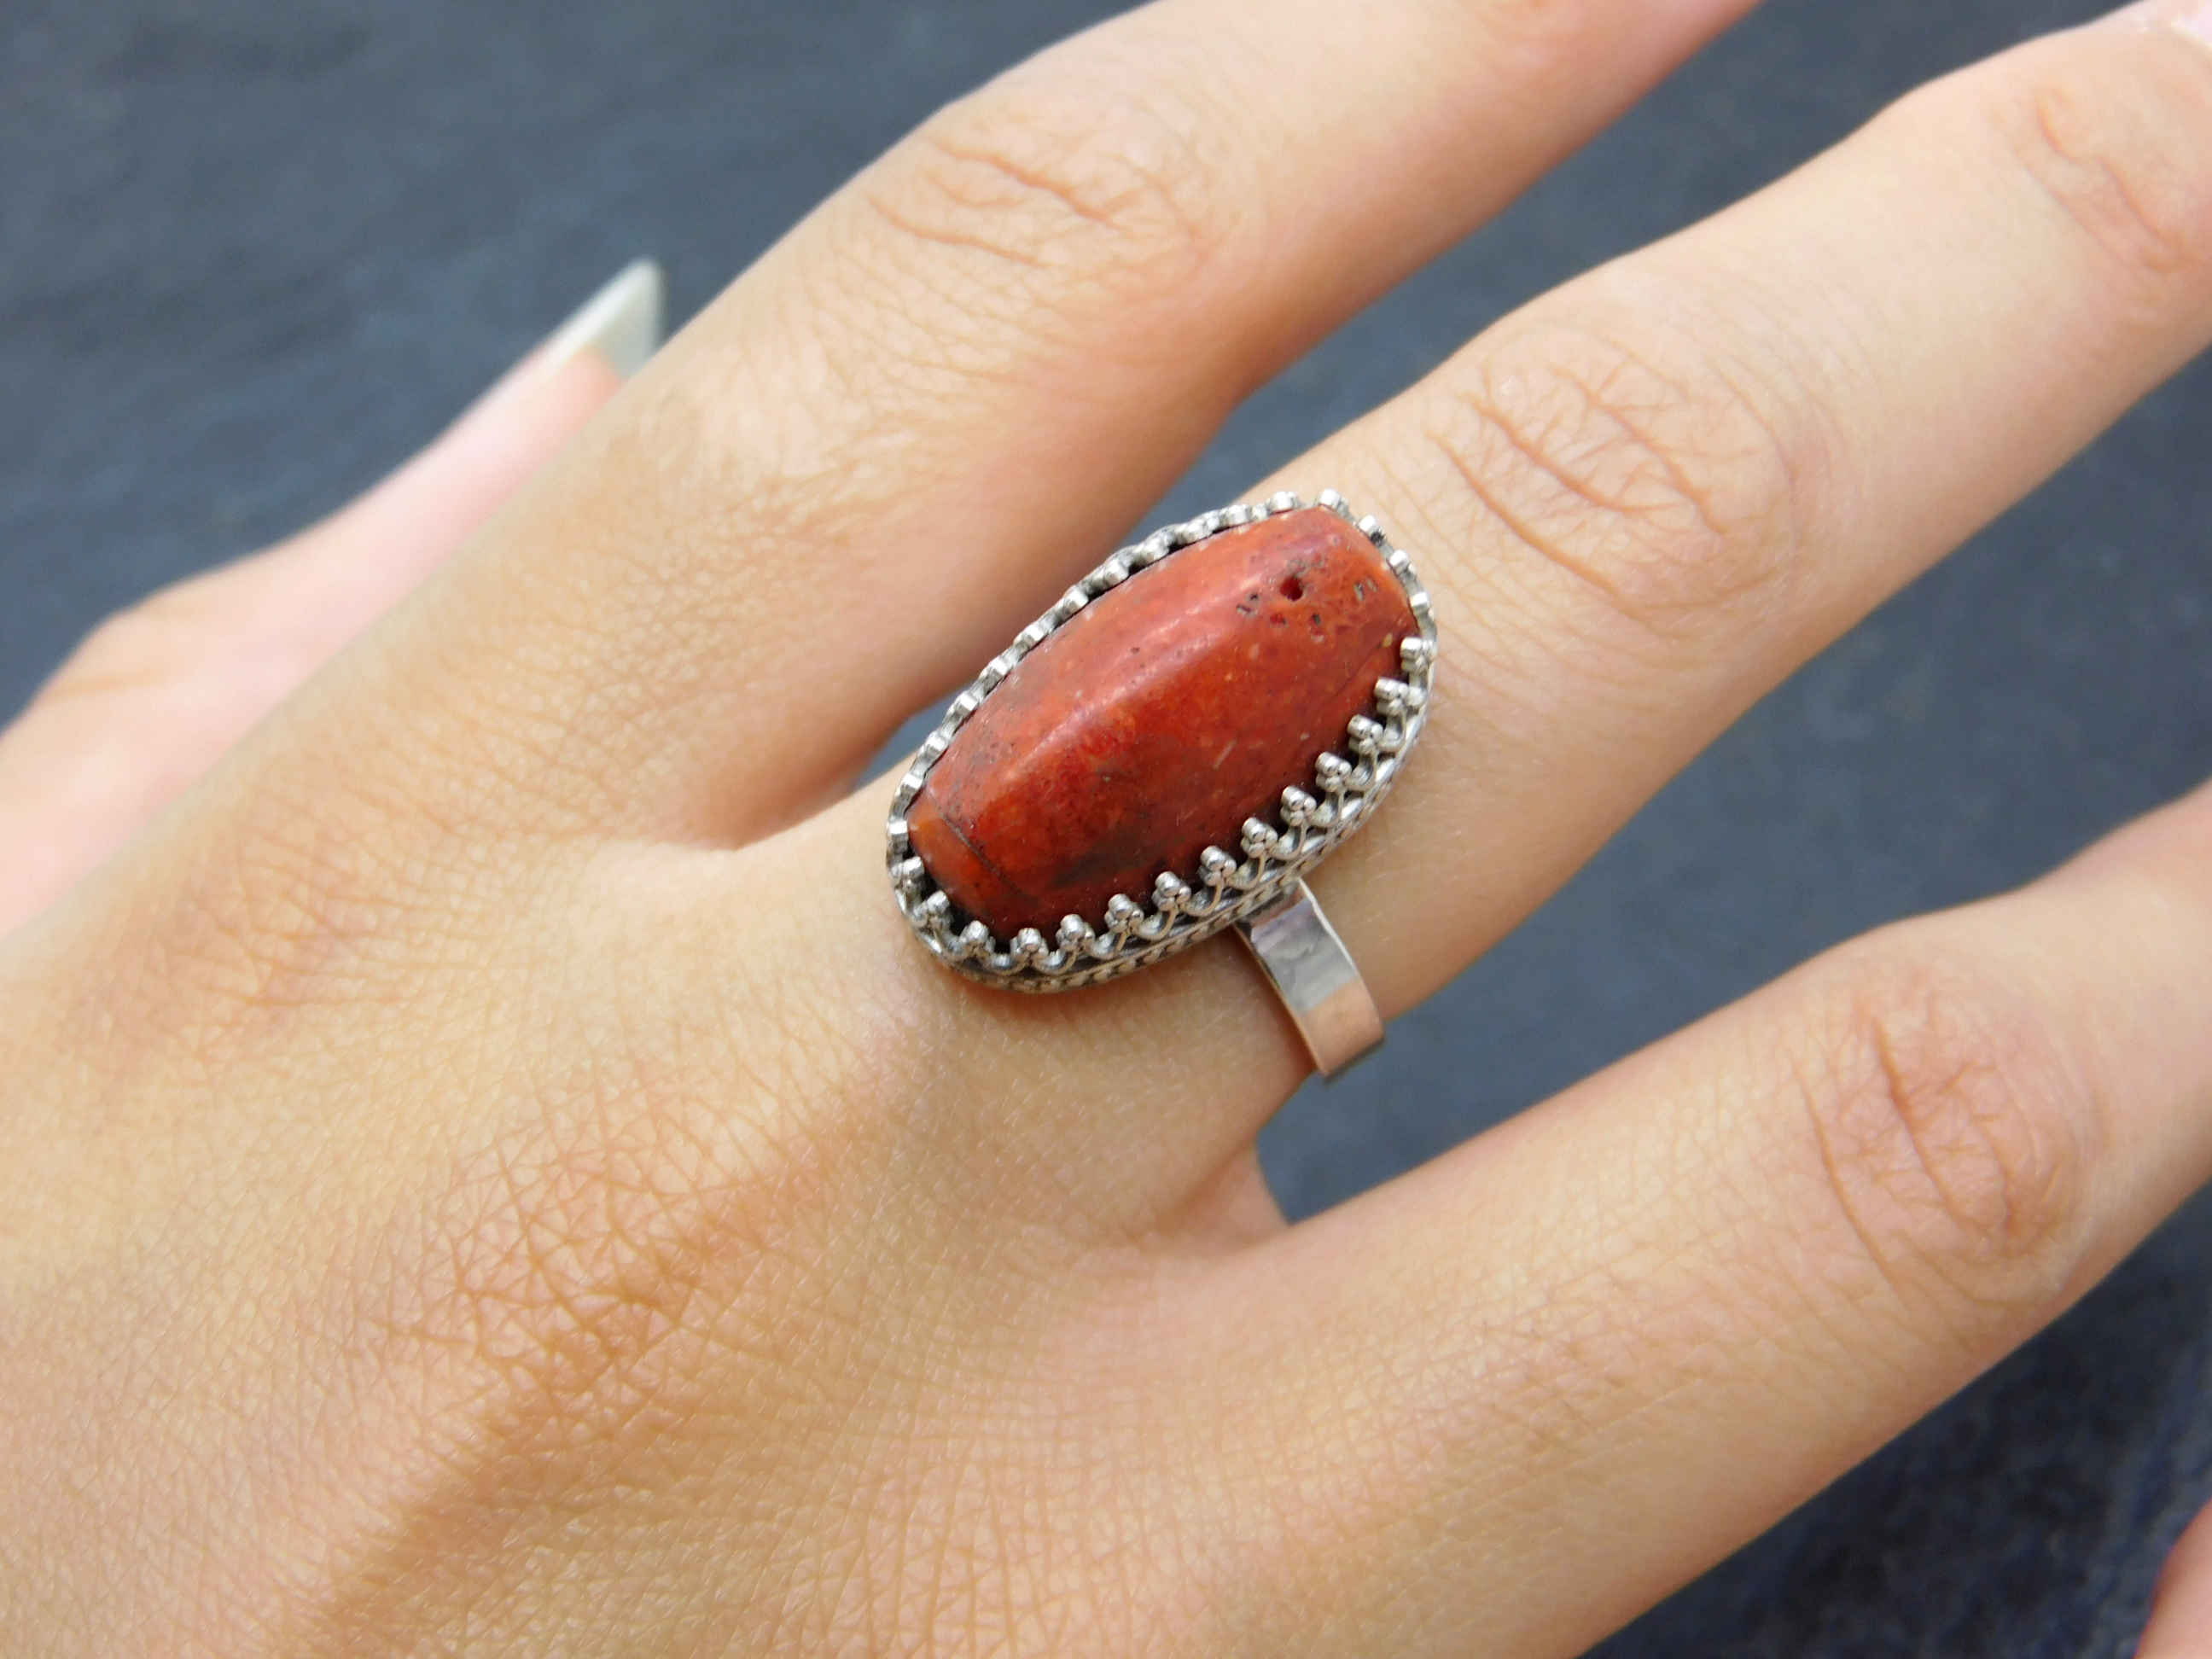 Sponge coral ring in hand forged decorative setting - Sterlingsilver